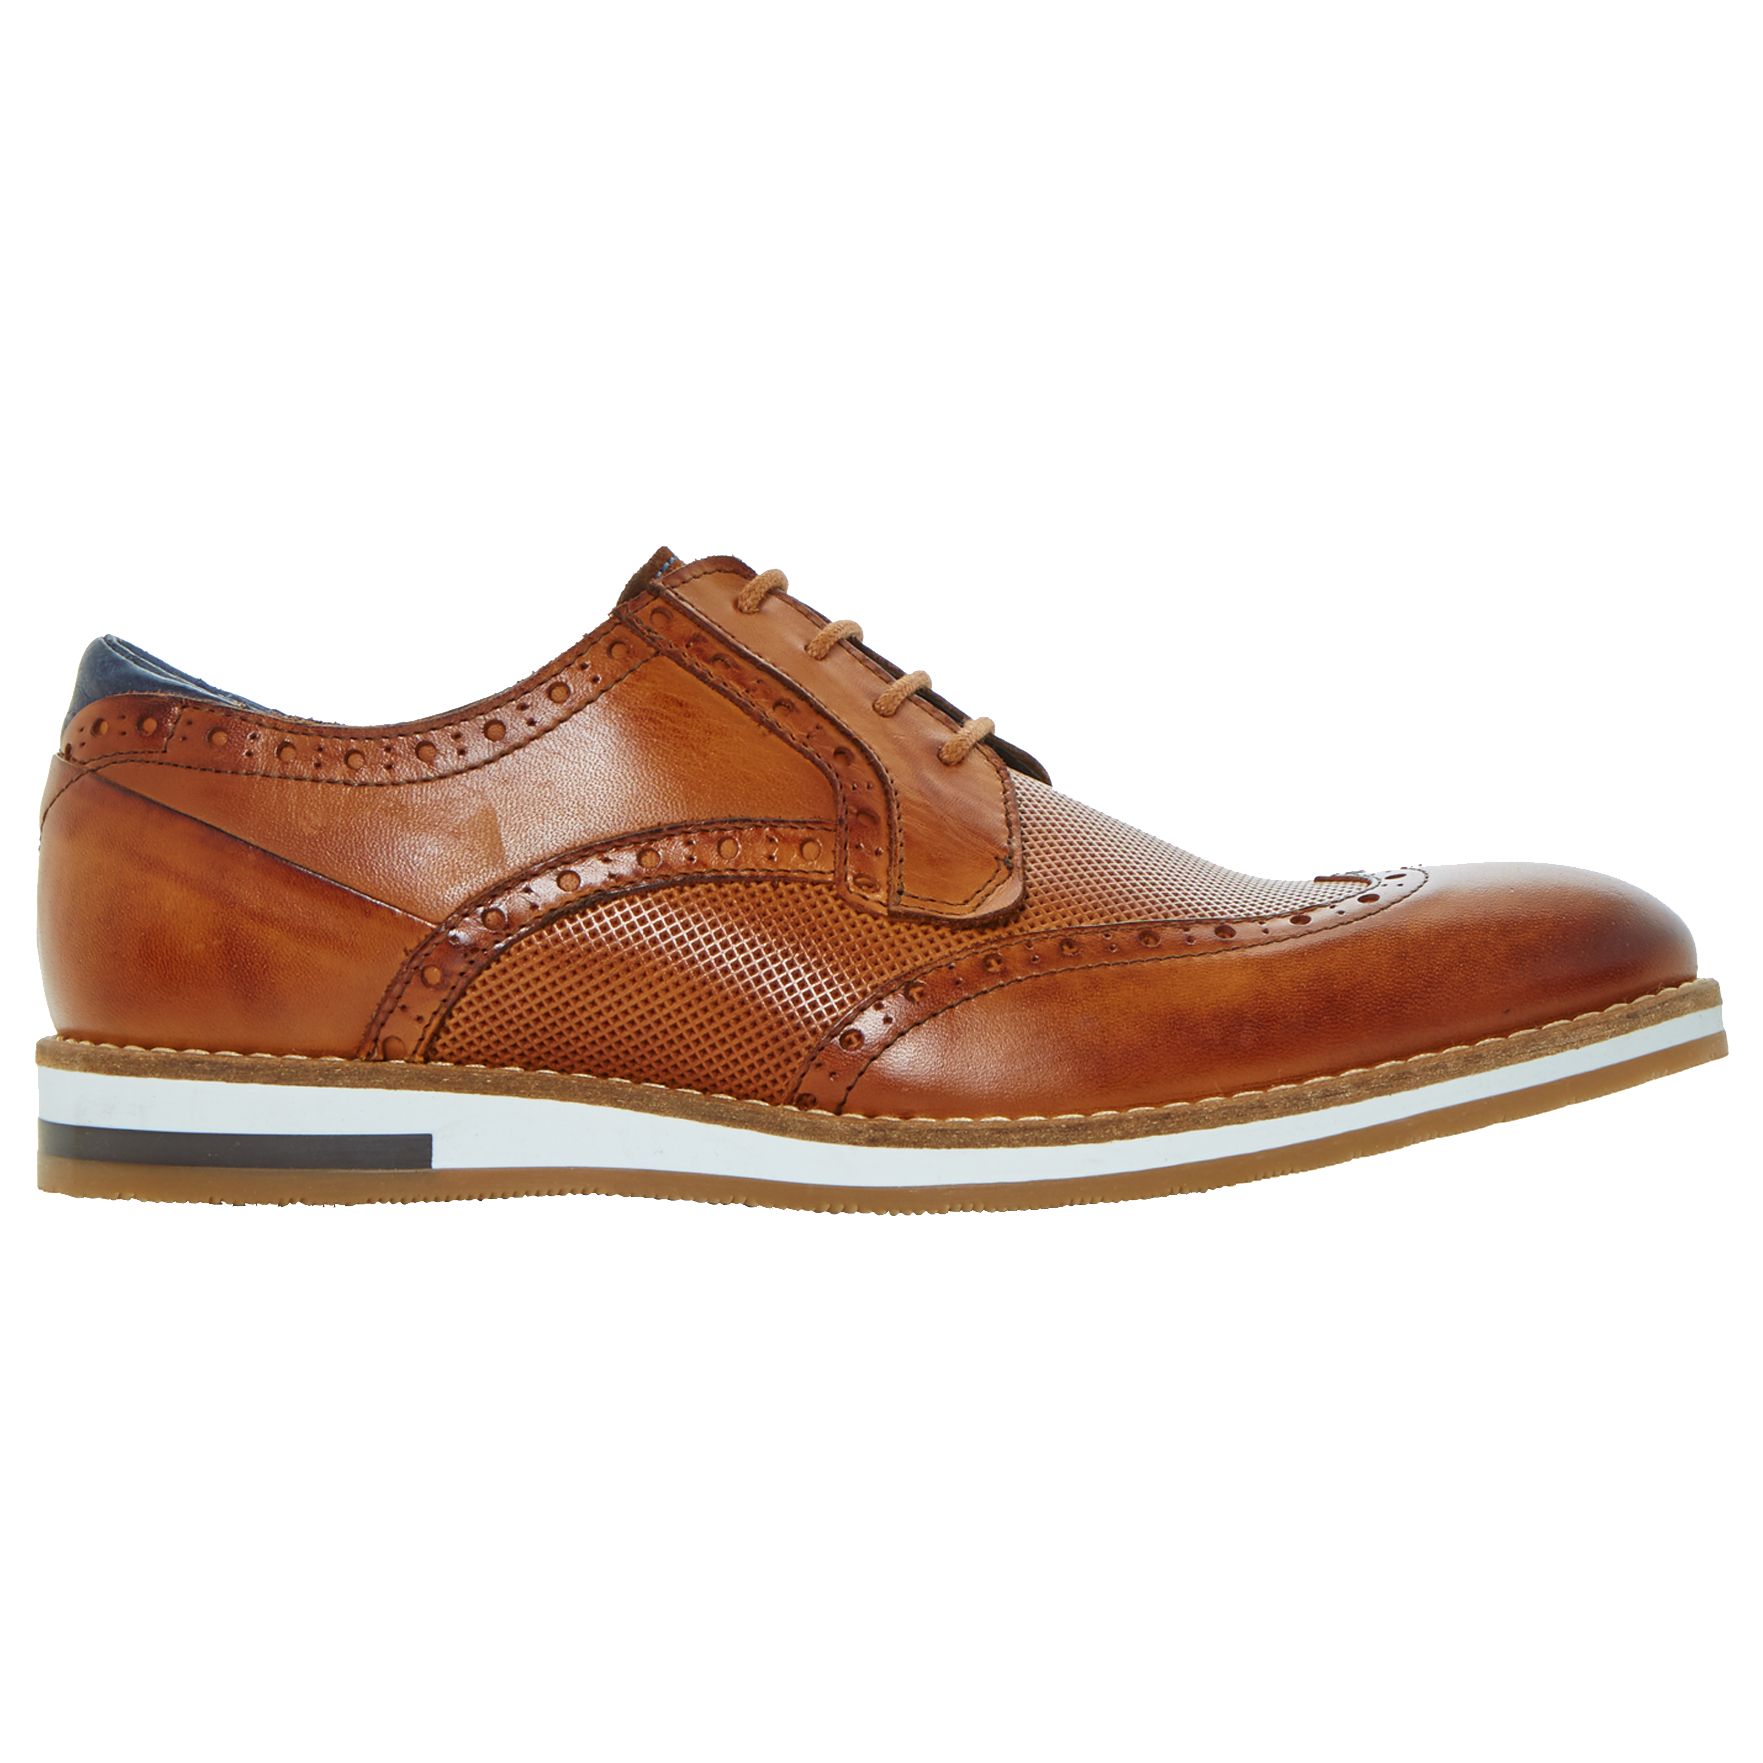 Bertie Baker Hill Gibson Leather Wingtip Shoes, Tan Leather, 12